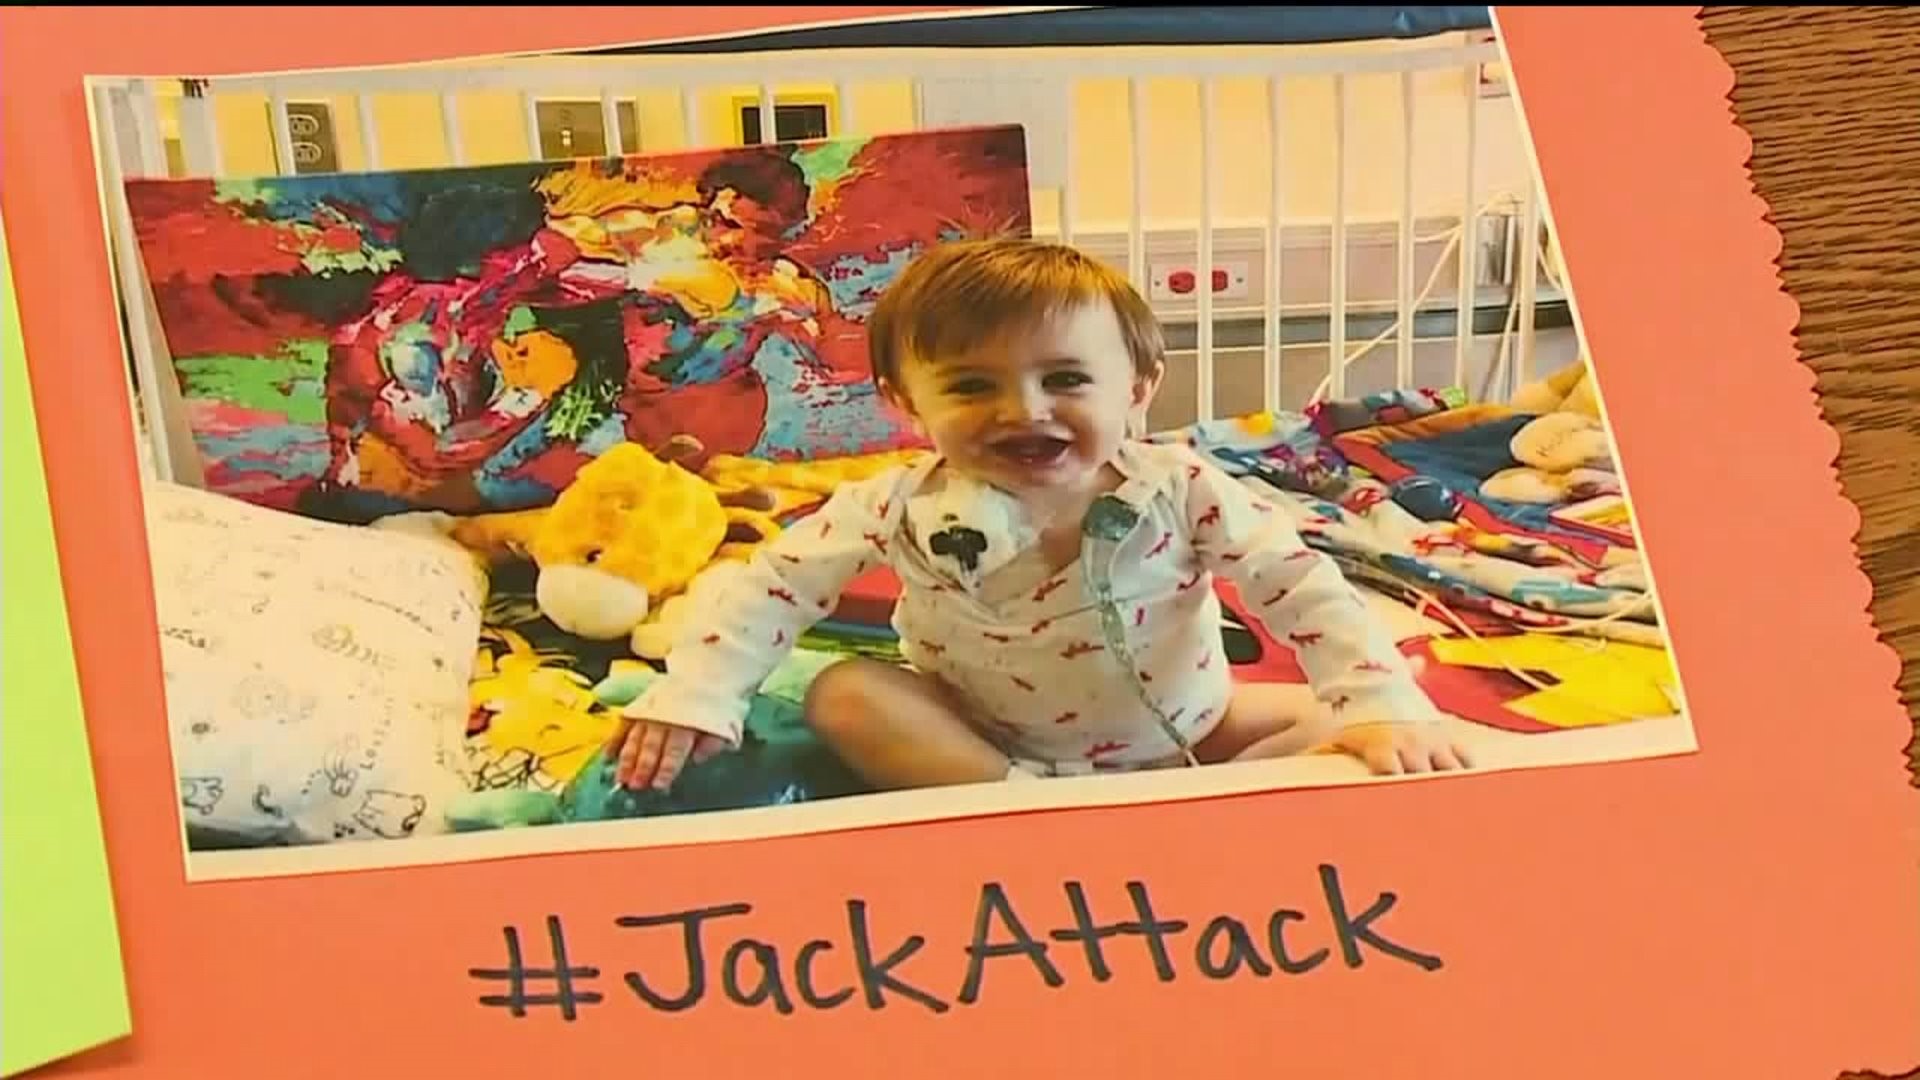 'Jack Attack' Fundraiser for Baby with Leukemia